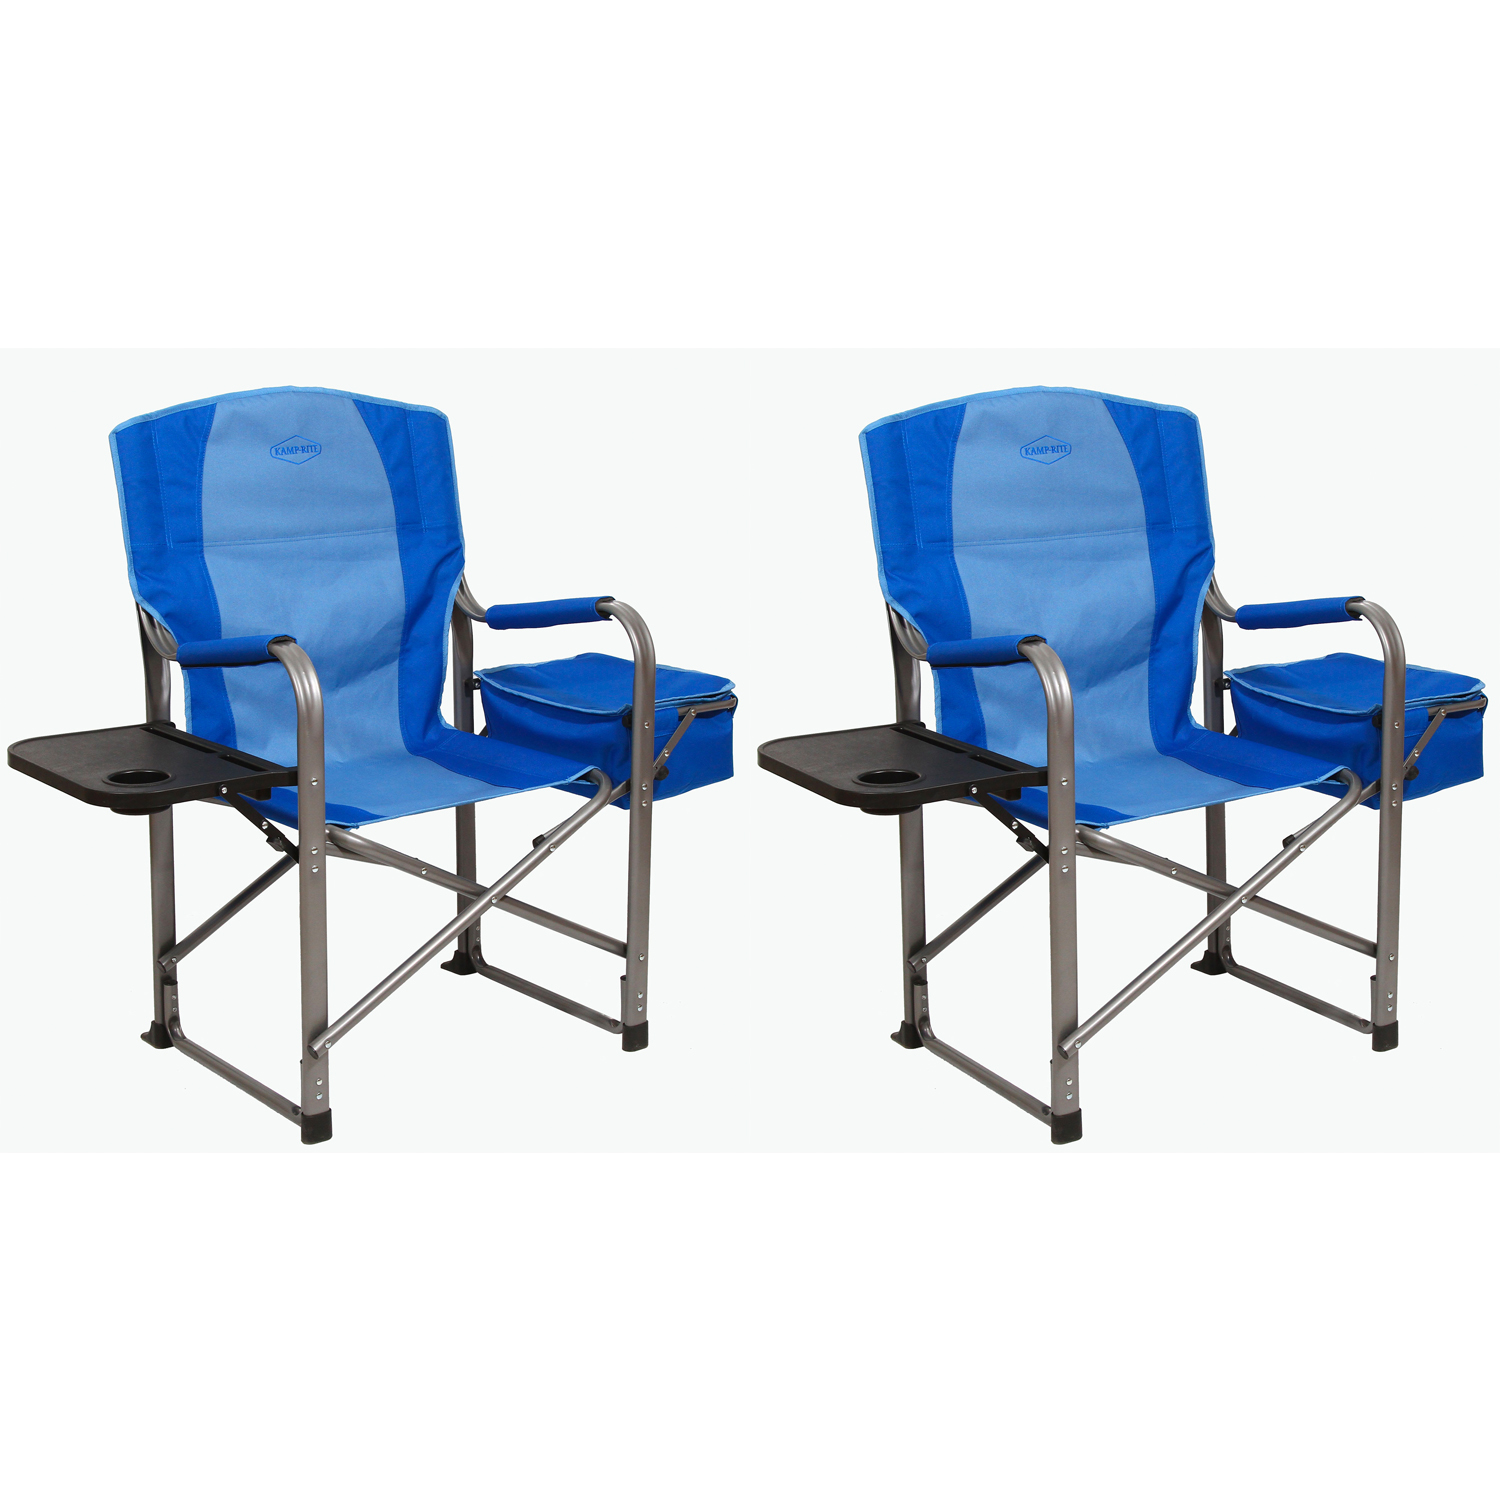 Kamp-Rite Director Portable Lounge Chair w/ Cooler & Side Table, (2 Pack) - image 1 of 10